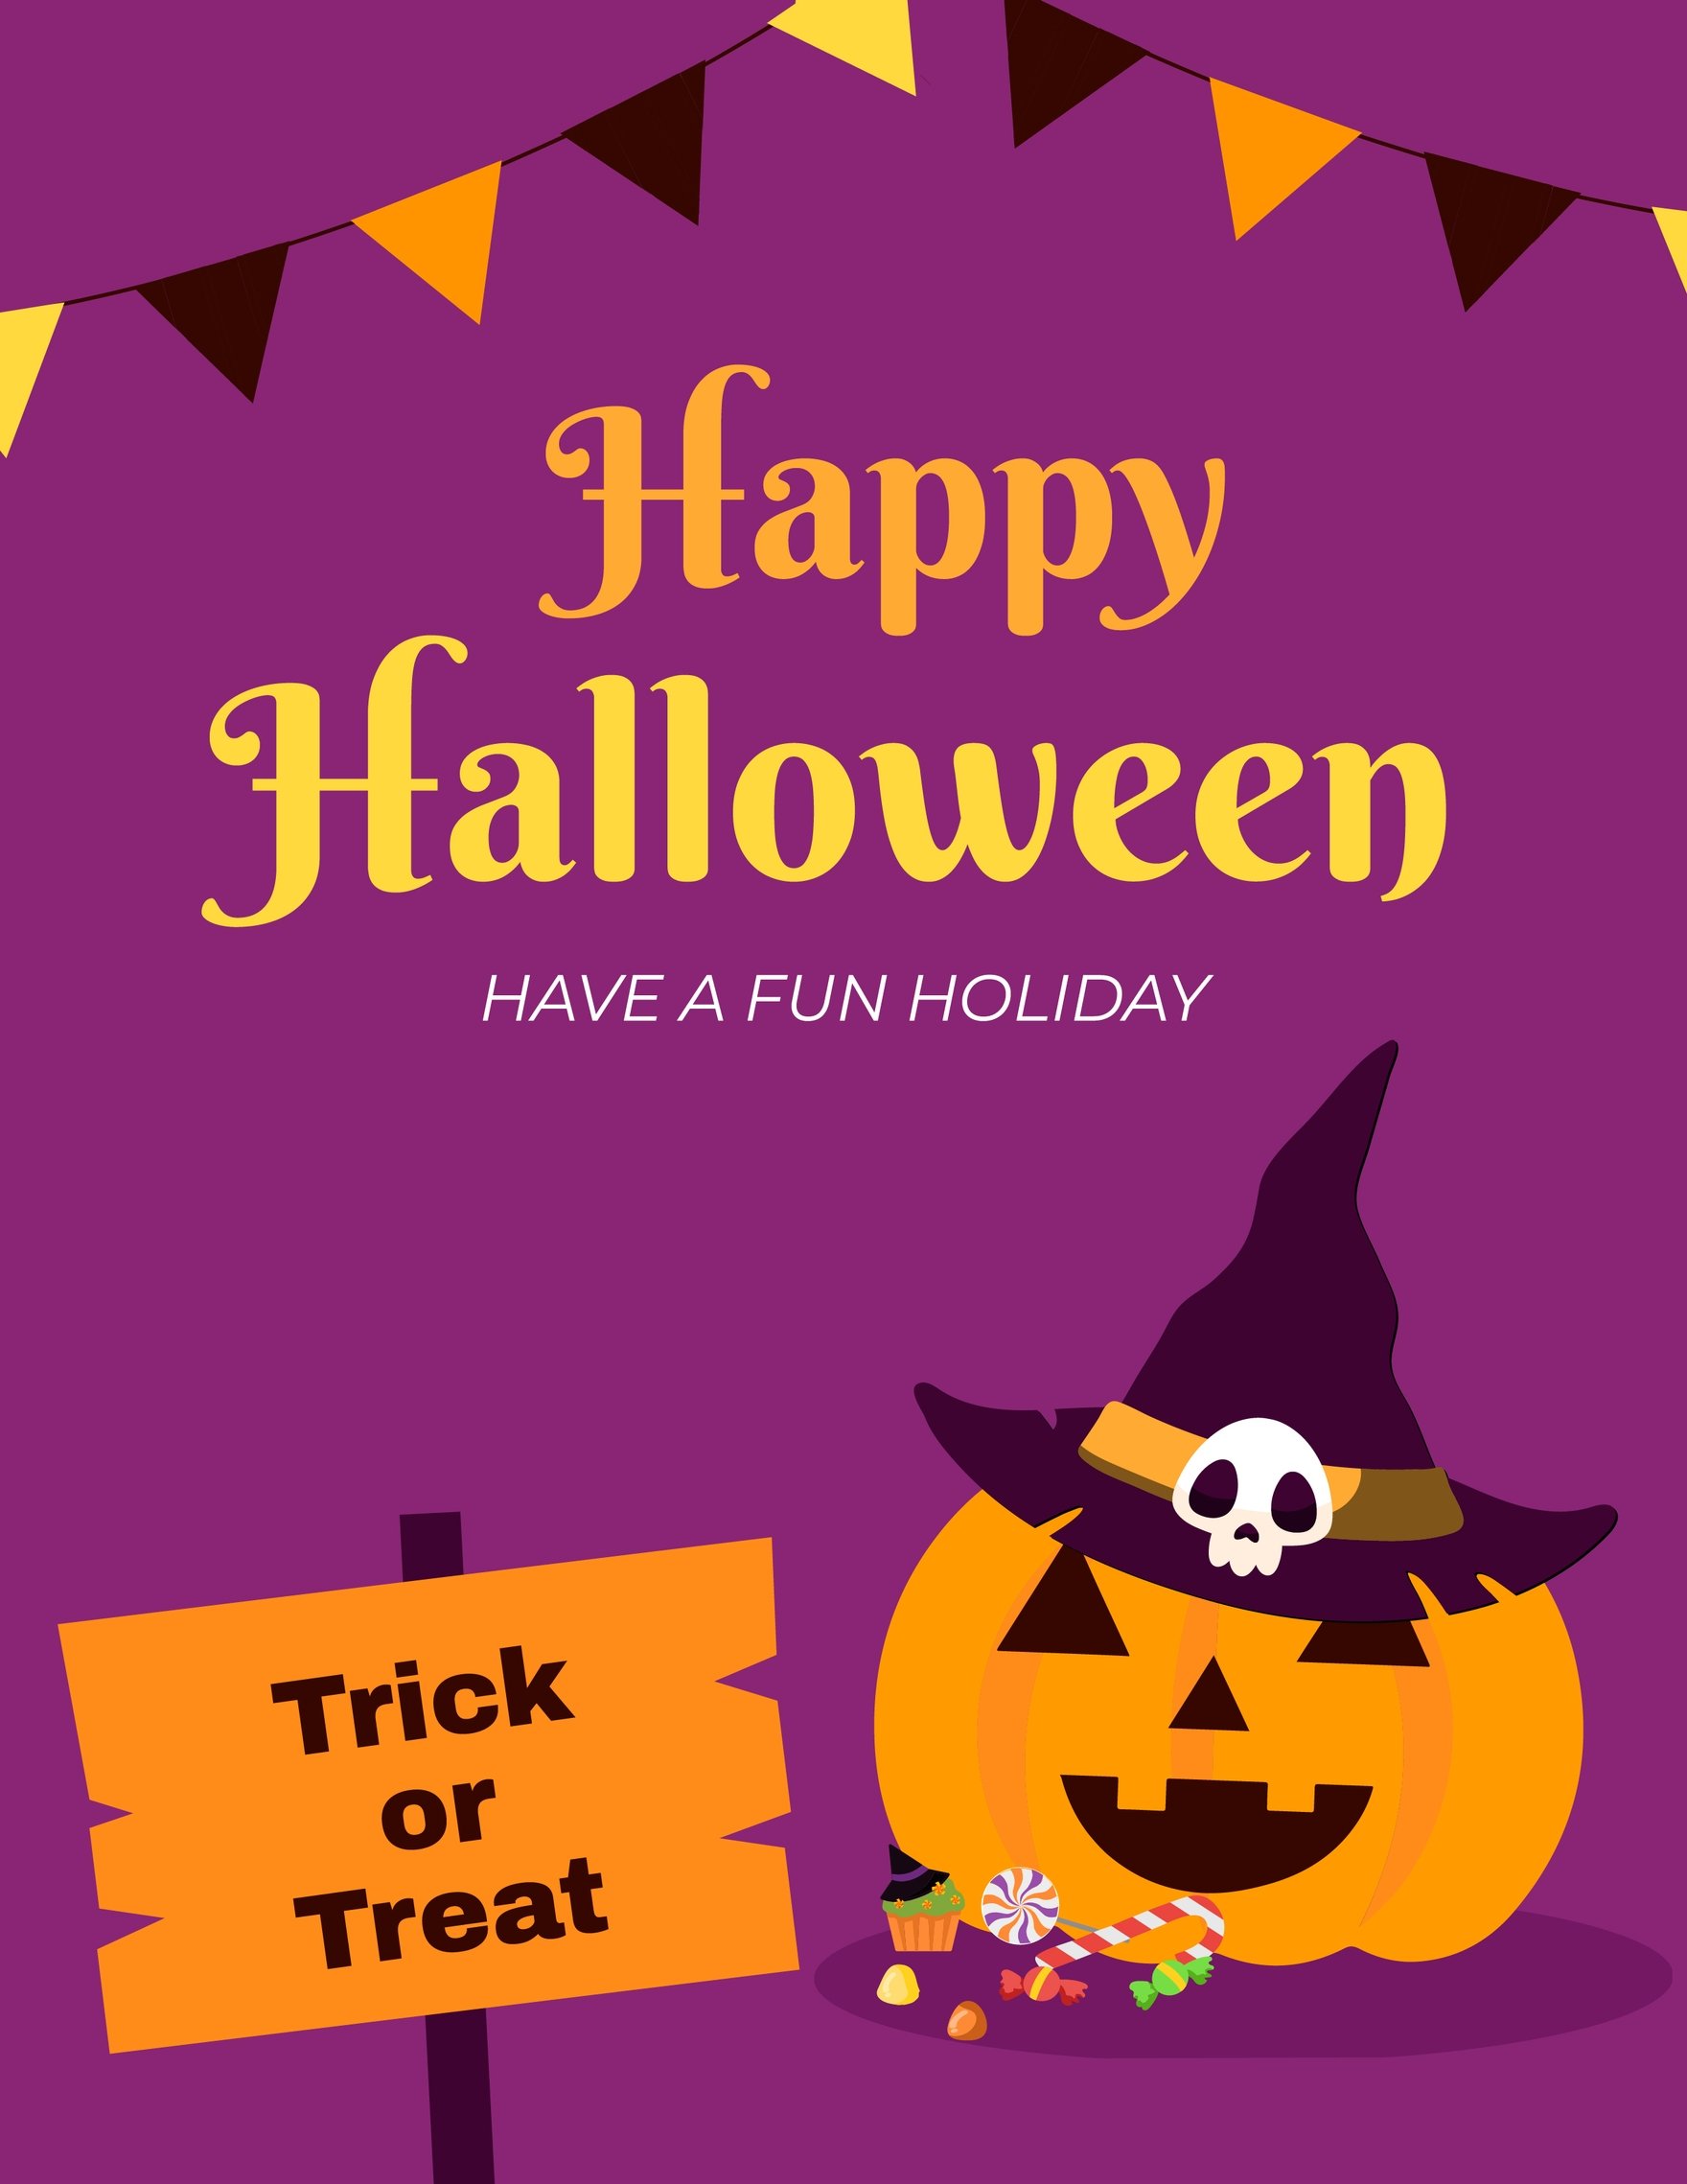 Free Happy Halloween Flyer in Word, Google Docs, Illustrator, PSD, Apple Pages, Publisher, EPS, SVG, JPG, PNG